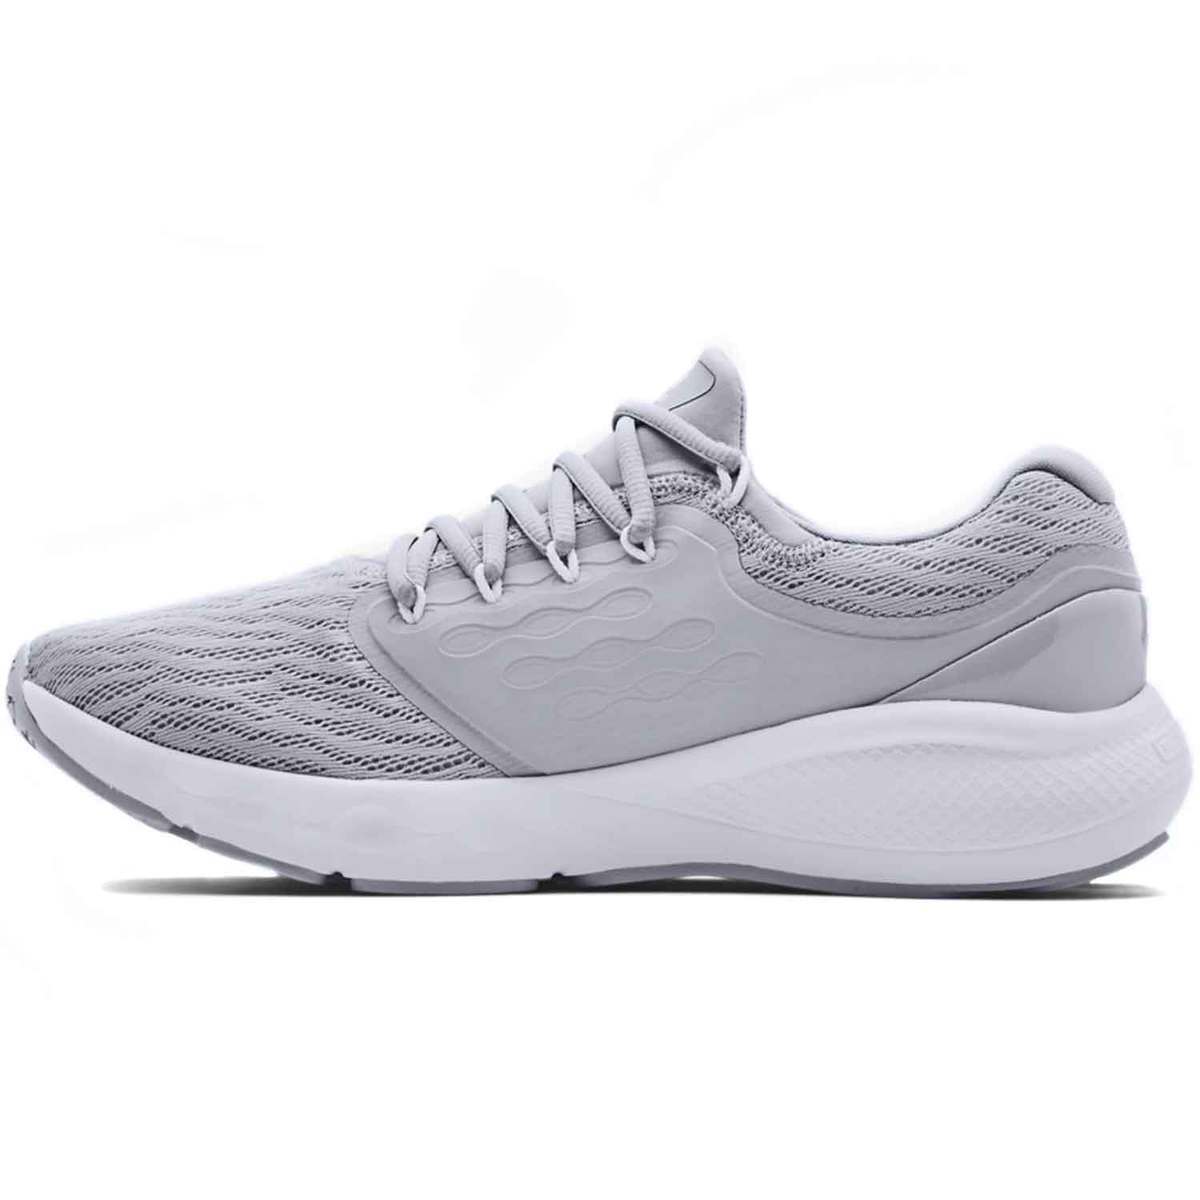 Under Armour Men's Charged Vantage Low Running Shoes - Mod Gray - Size ...